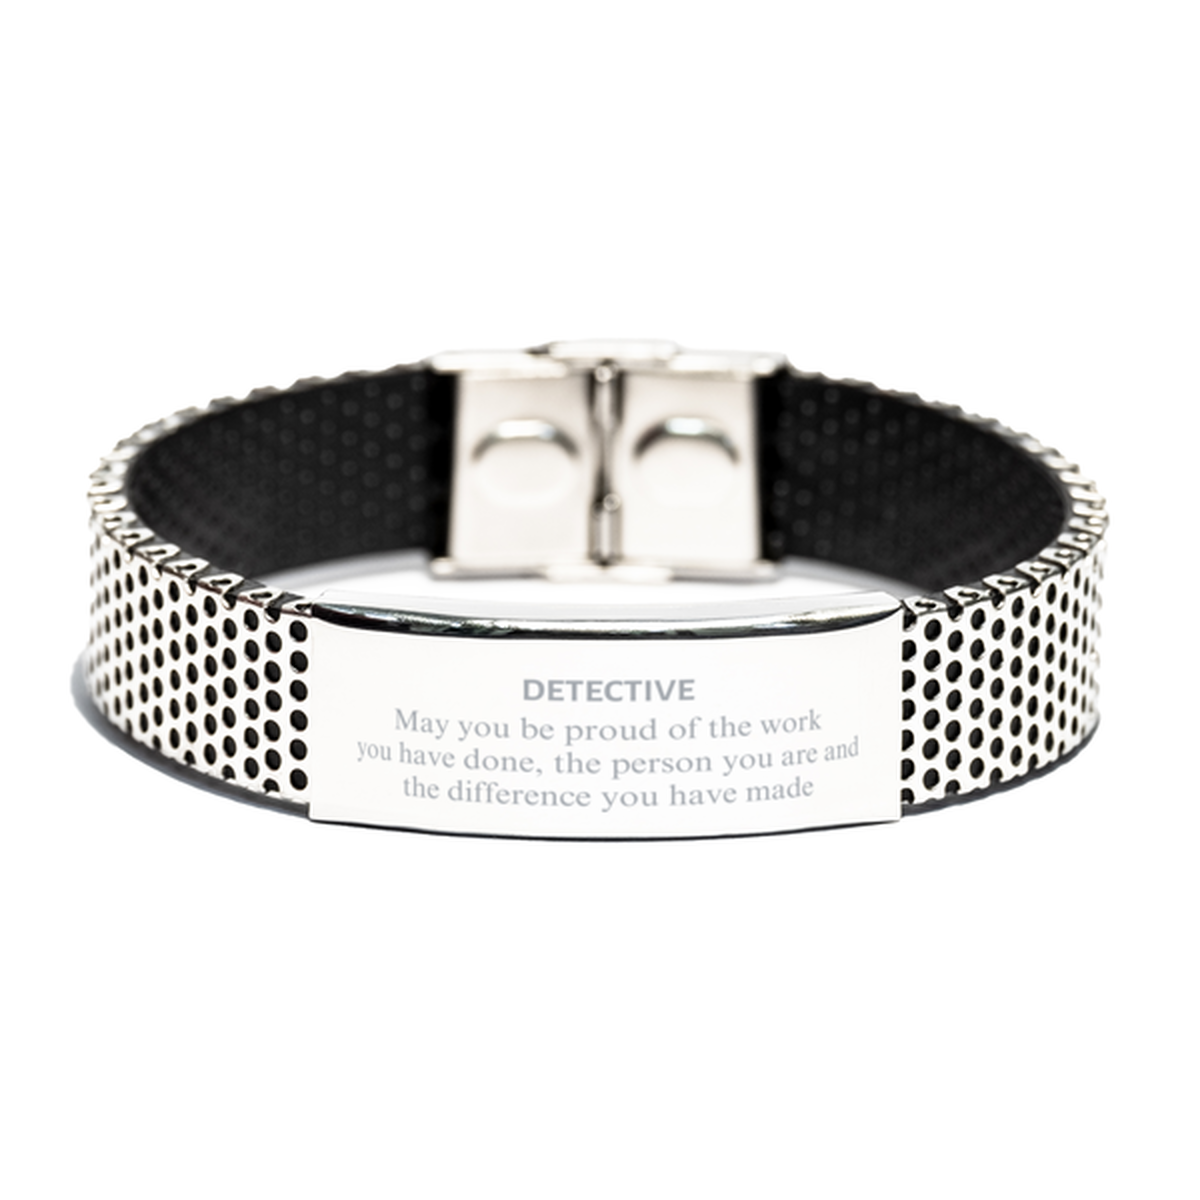 Detective May you be proud of the work you have done, Retirement Detective Stainless Steel Bracelet for Colleague Appreciation Gifts Amazing for Detective